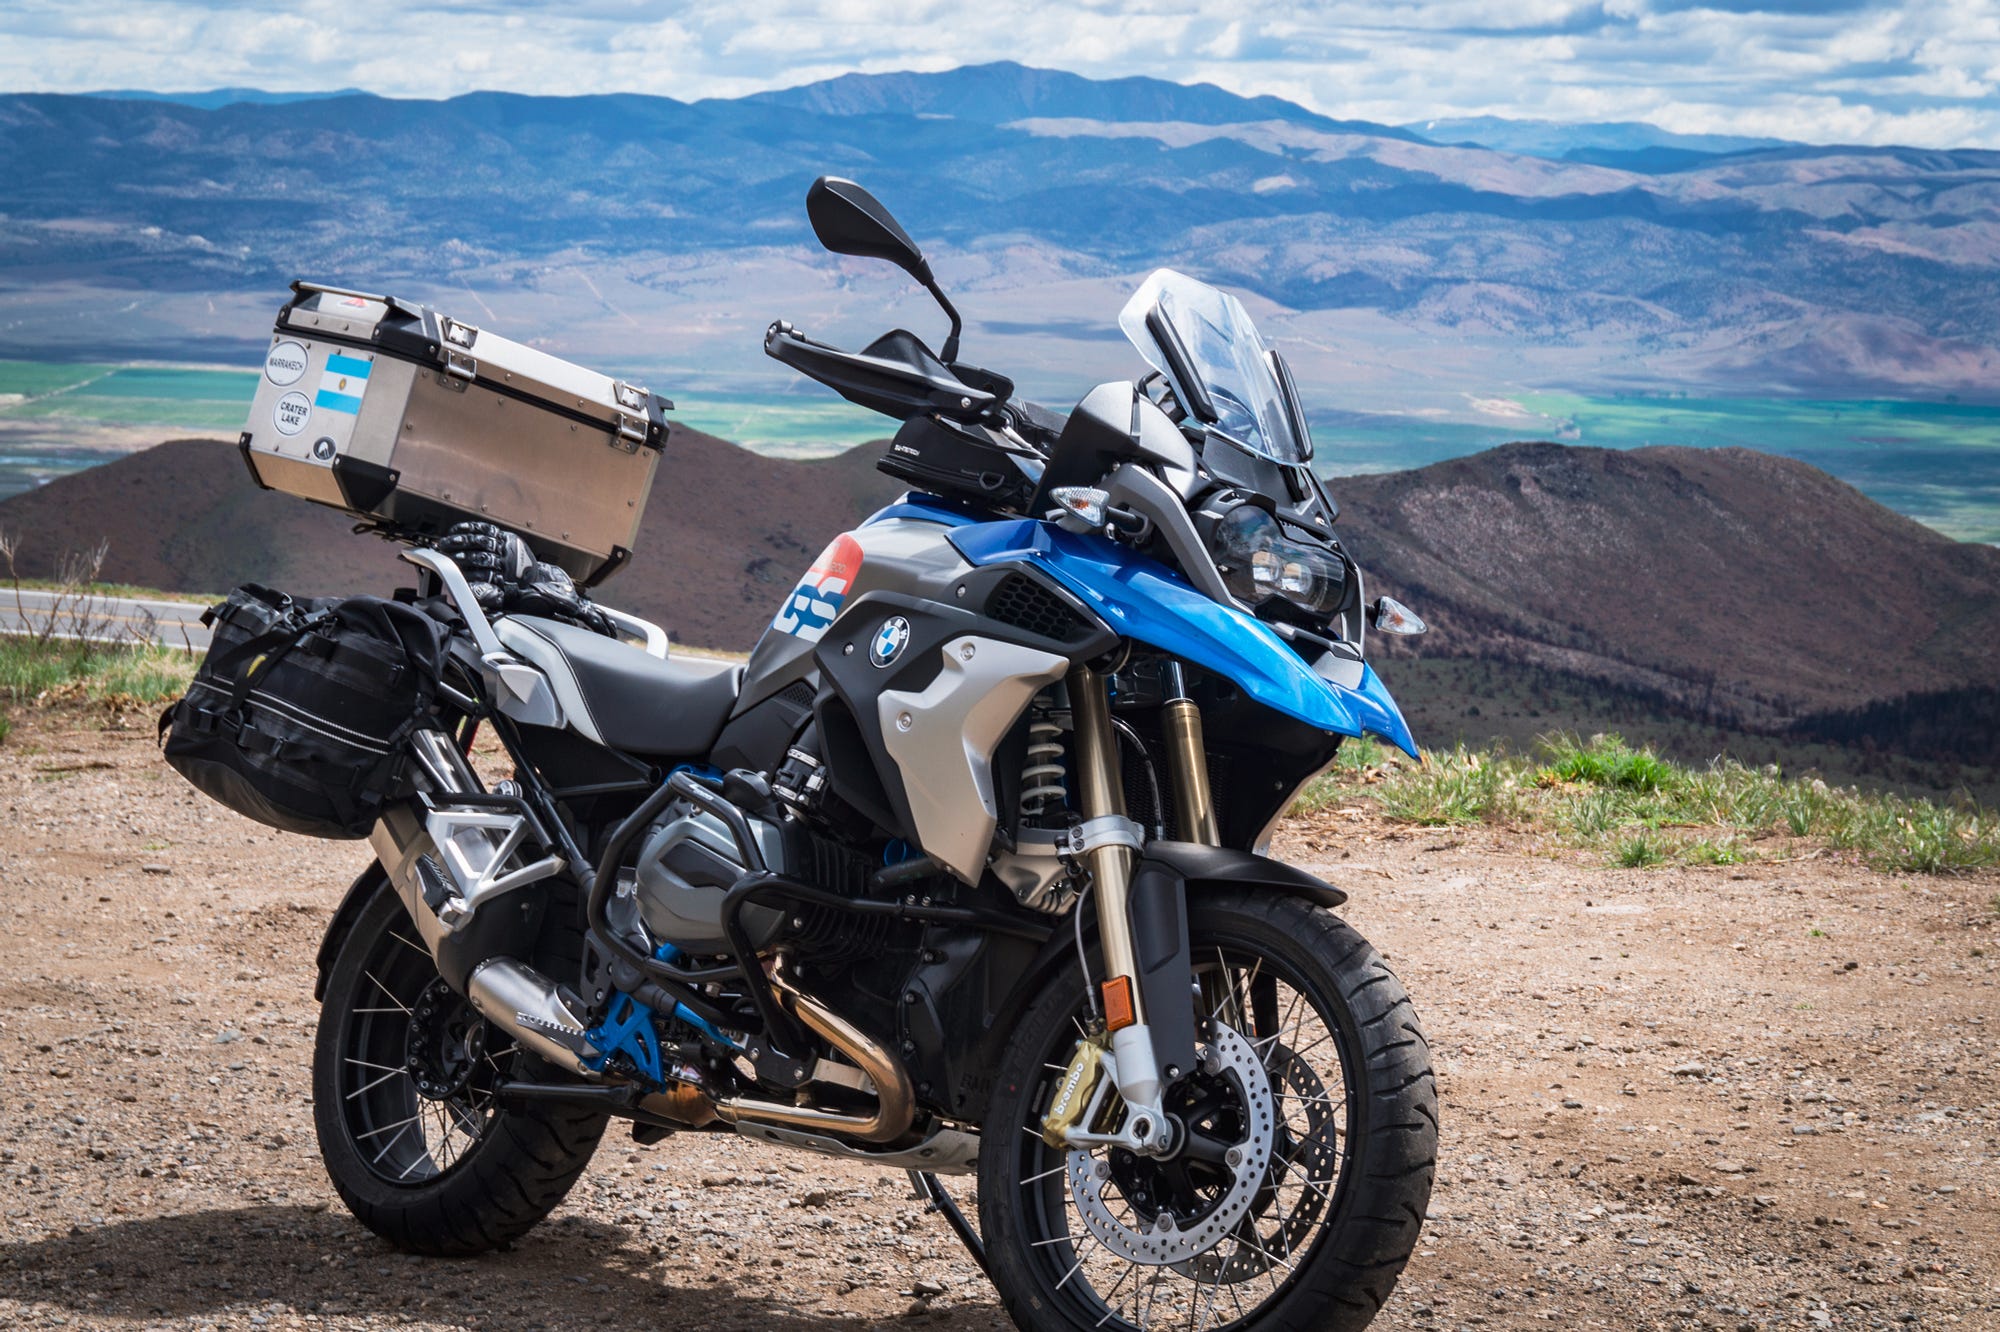 An honest motorcycle review: The 2018 BMW R1200GS (lowered rallye spec), by Jon Madden